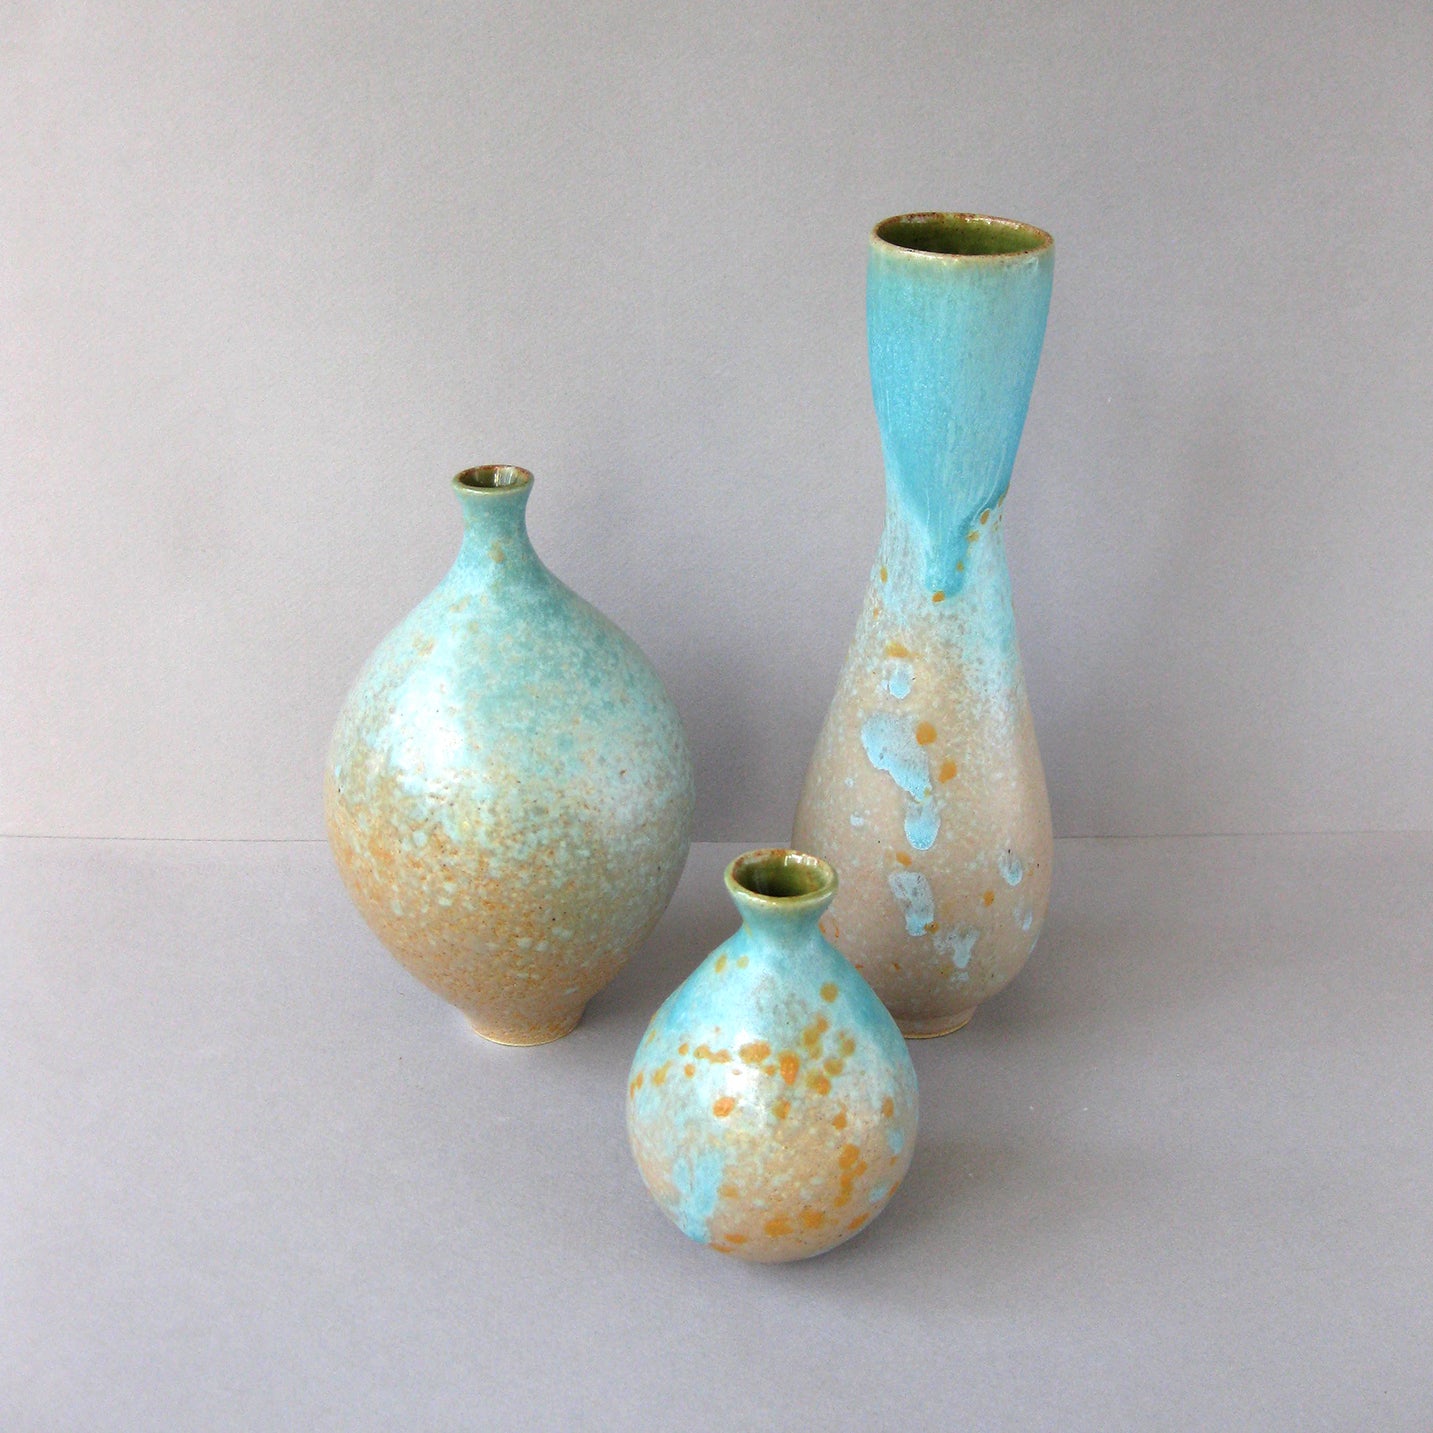 Turquoise Vases by Lai Montesca